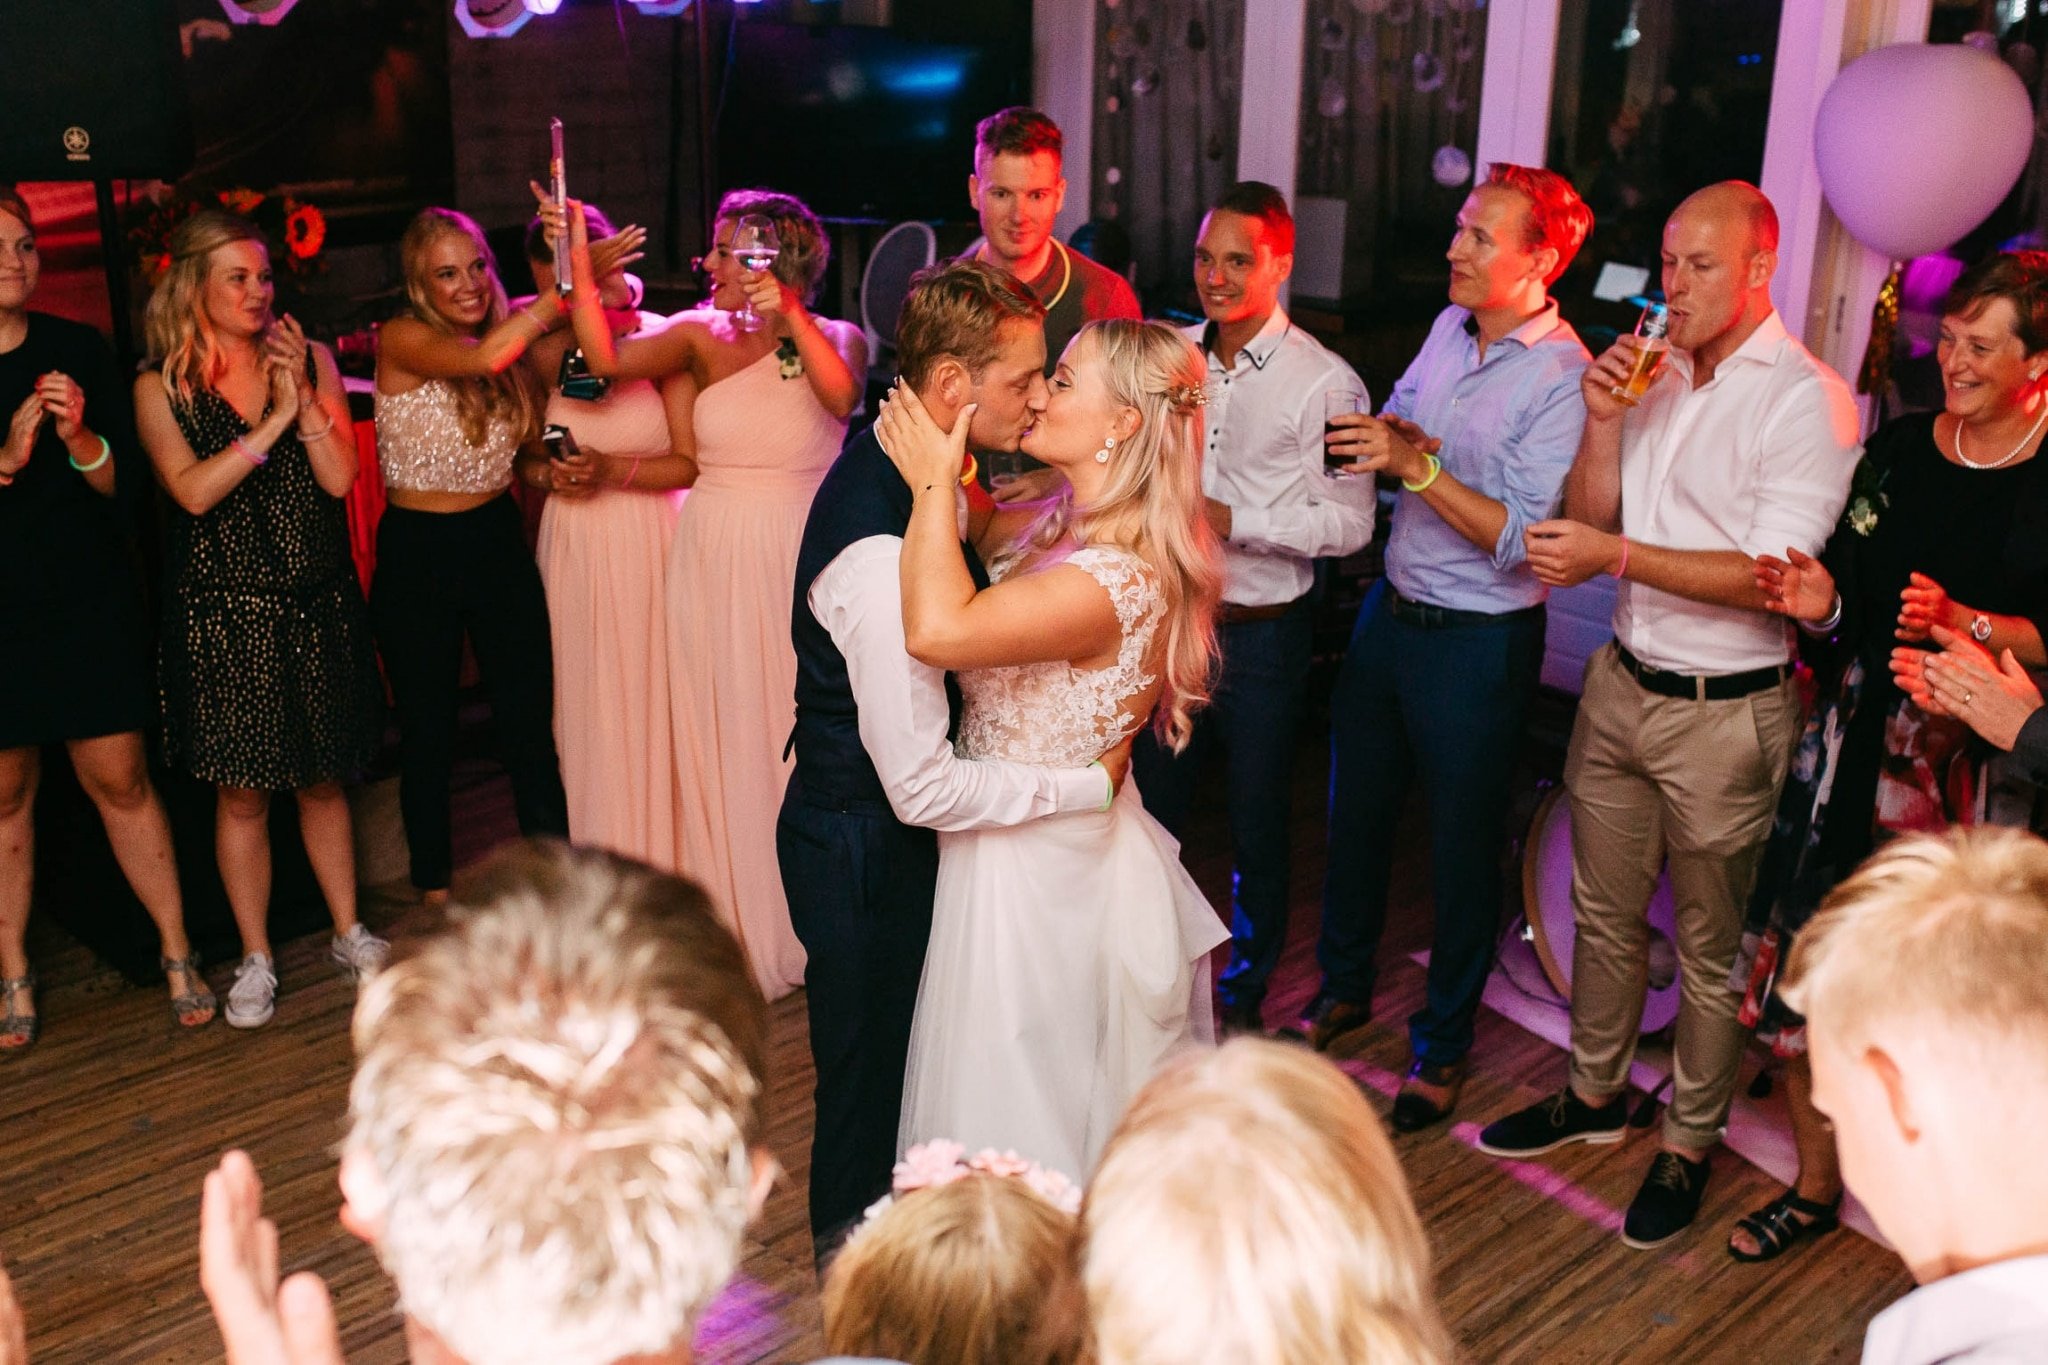 A bride and groom kiss on the dance floor during their wedding reception.